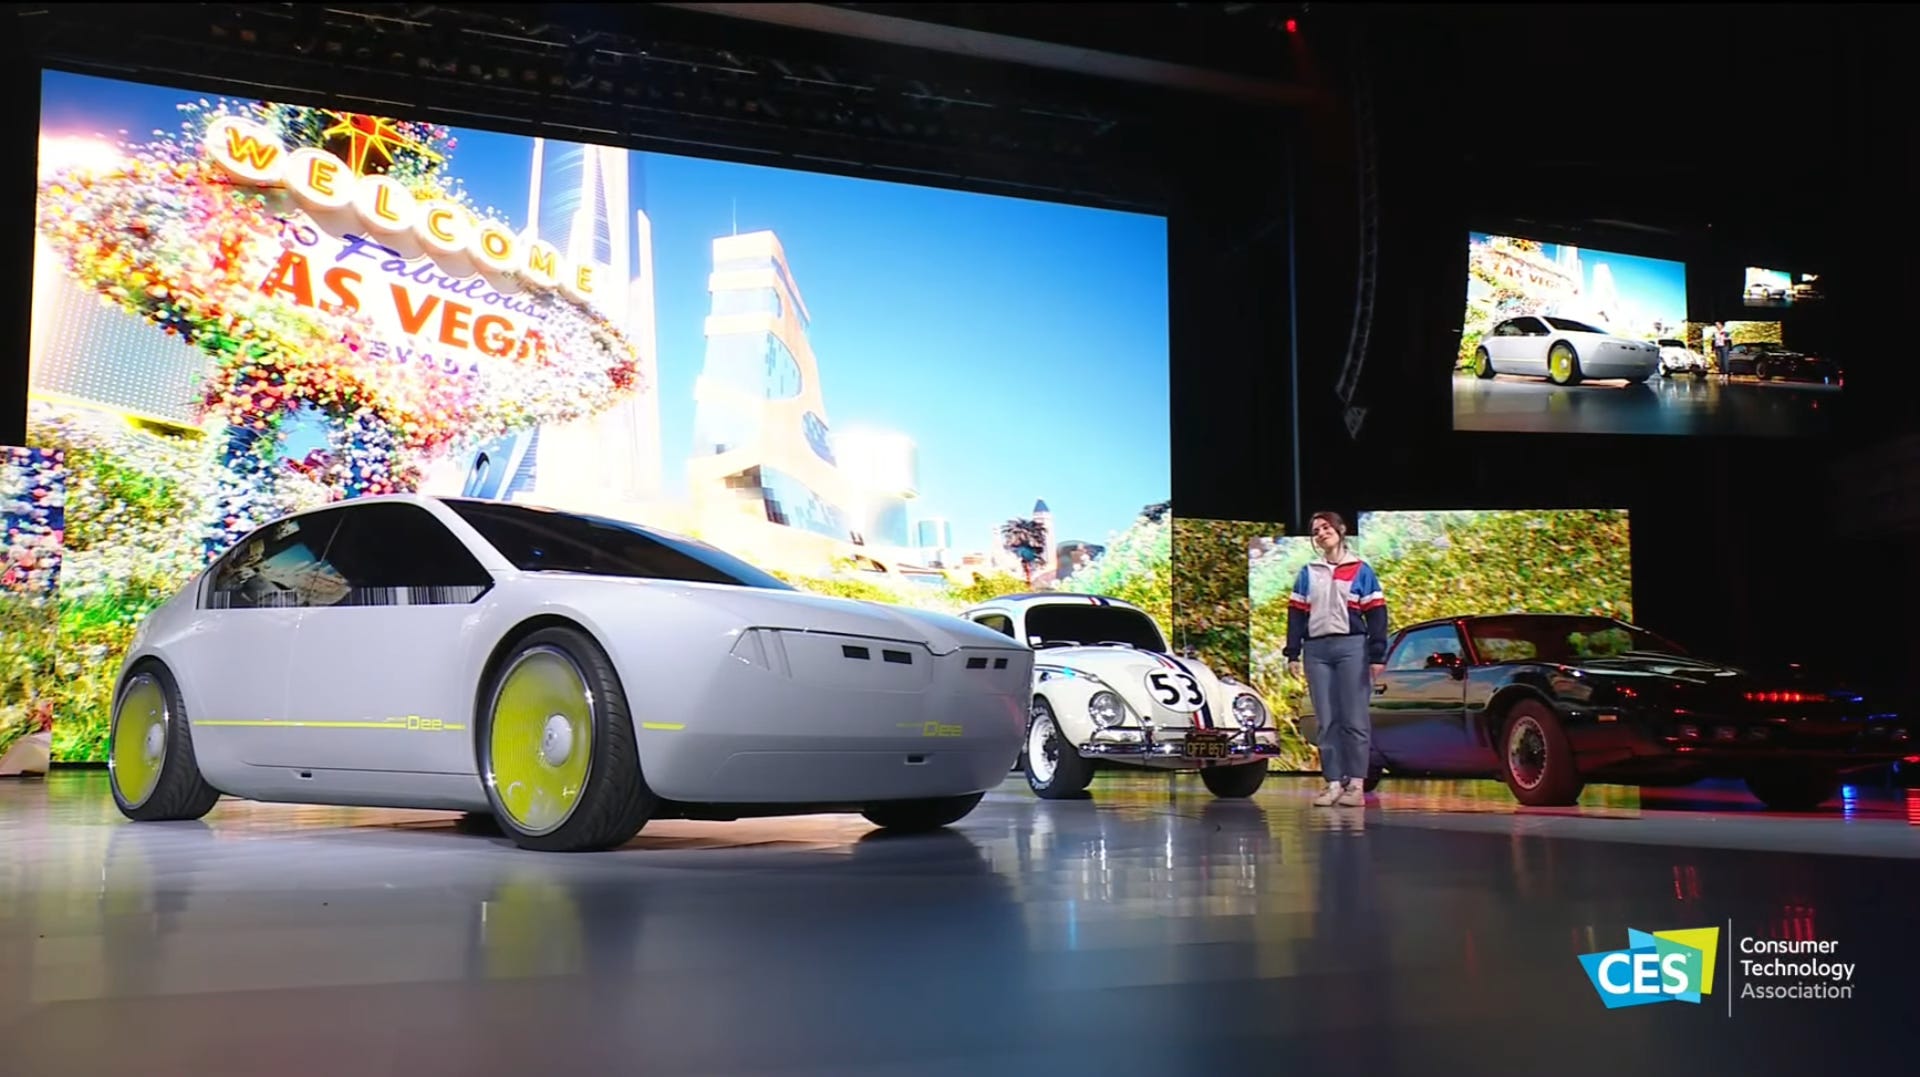 BMW's Dee car with personality on stage with Hollywood cars Herbie and KITT (from Knight Rider).